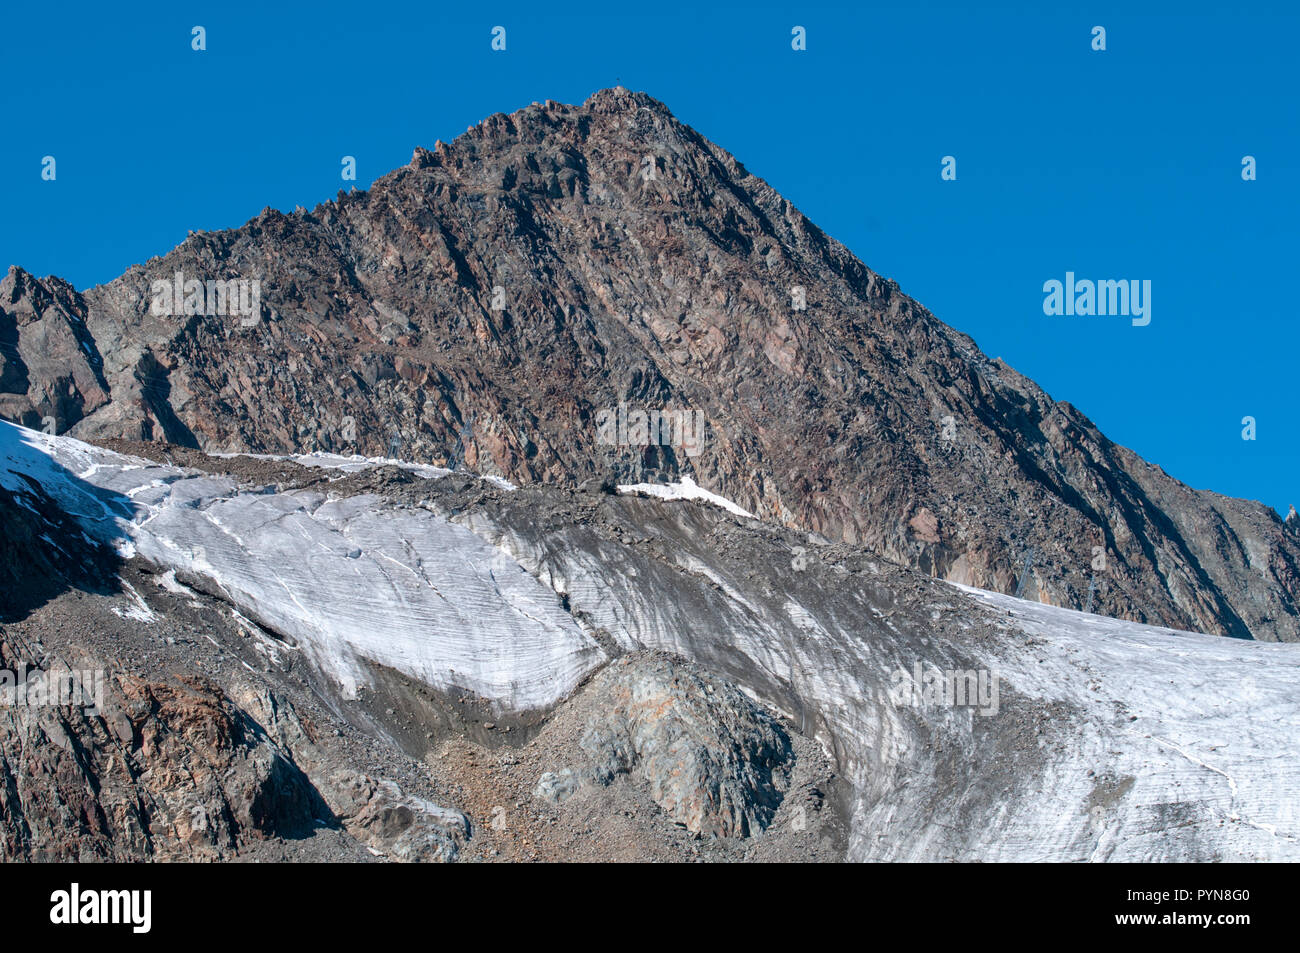 The Stubaier Wildspitze is a 3,341-metre-high mountain in the Stubai Alps in the Austrian state of Tyrol. Northeast of the summit lie two glaciers, th Stock Photo